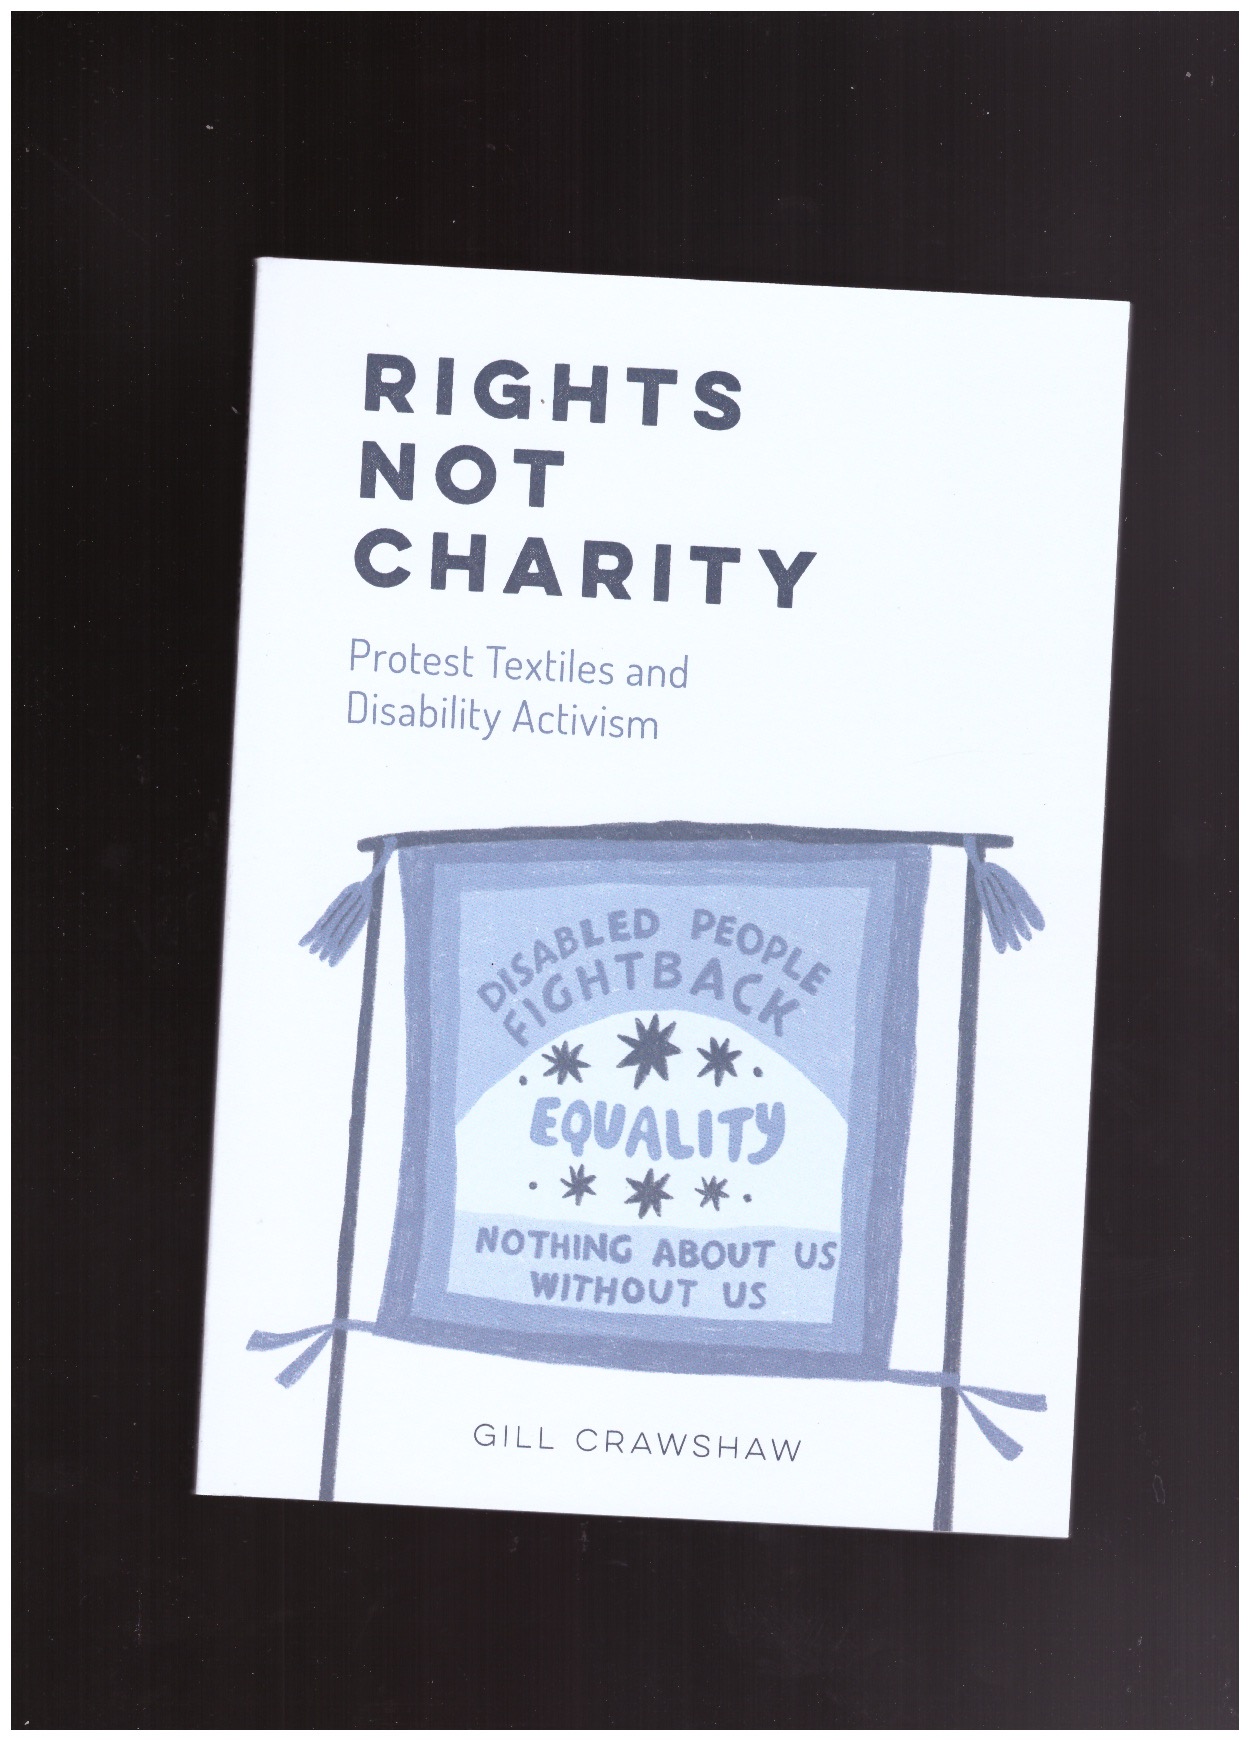 CRAWSHAW, Gill - Rights not charity - Protest Textiles and Disability Activism